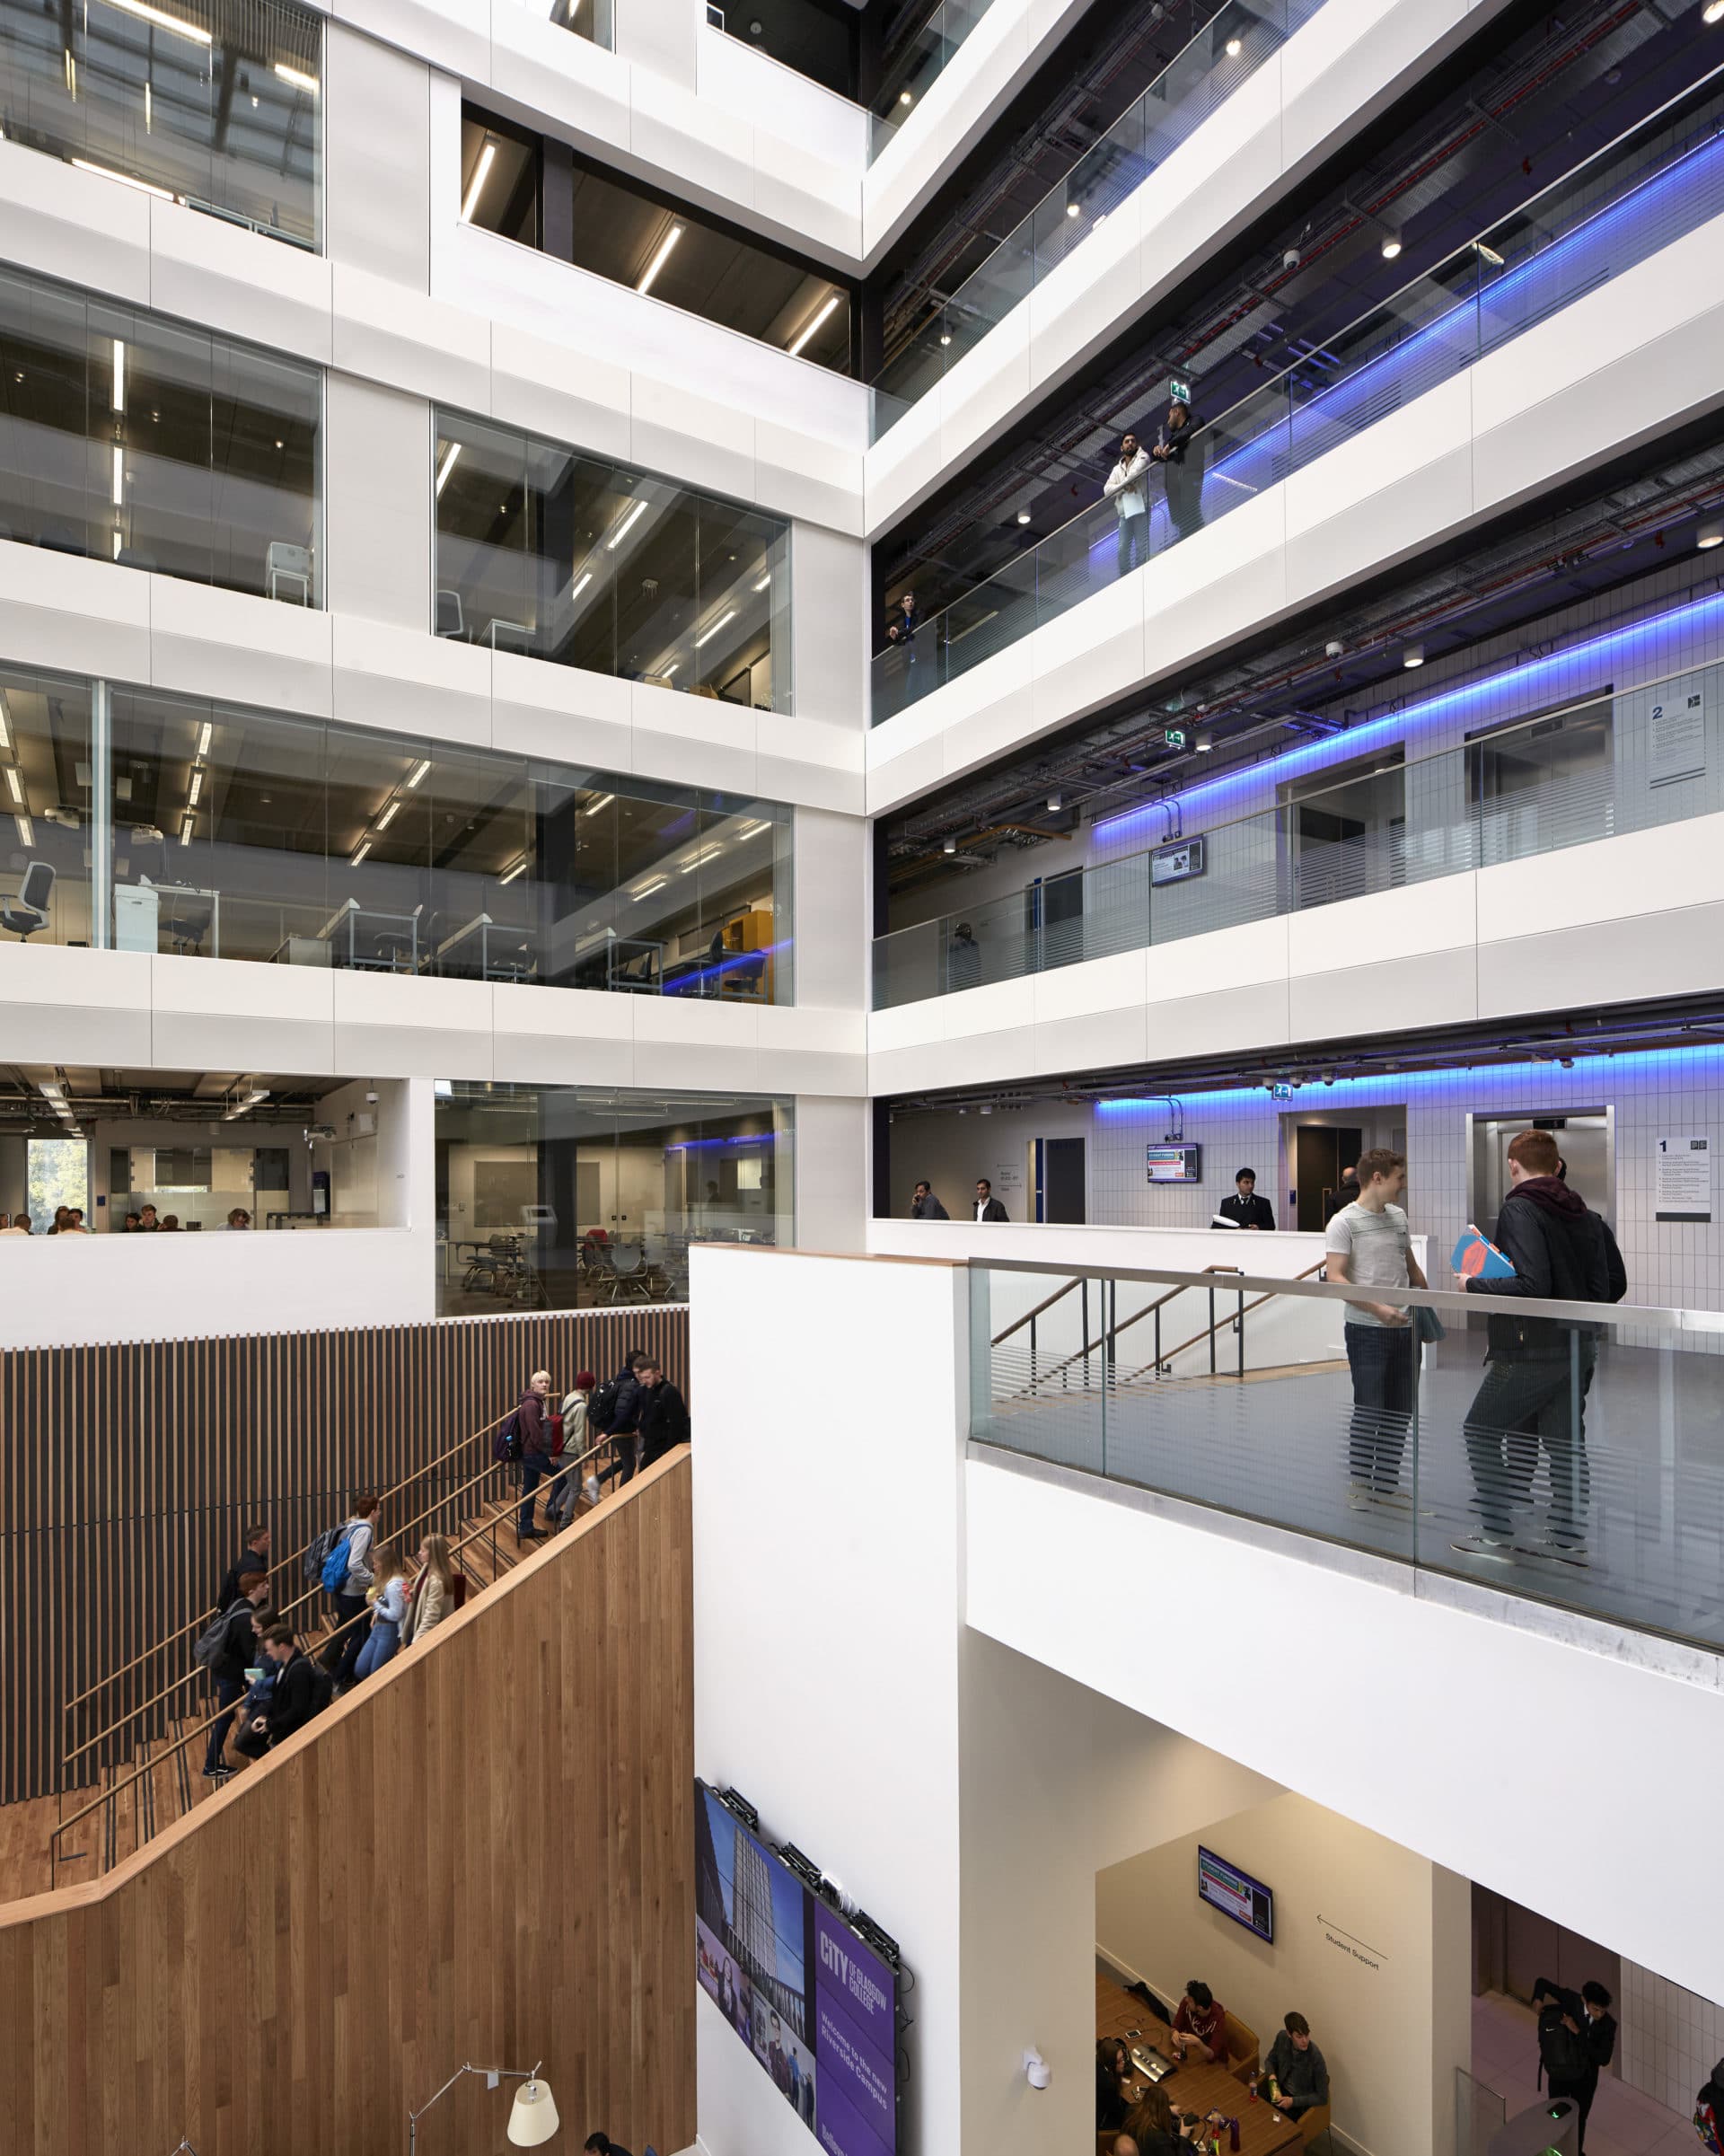 SAS provides acoustics and lighting solutions for new college